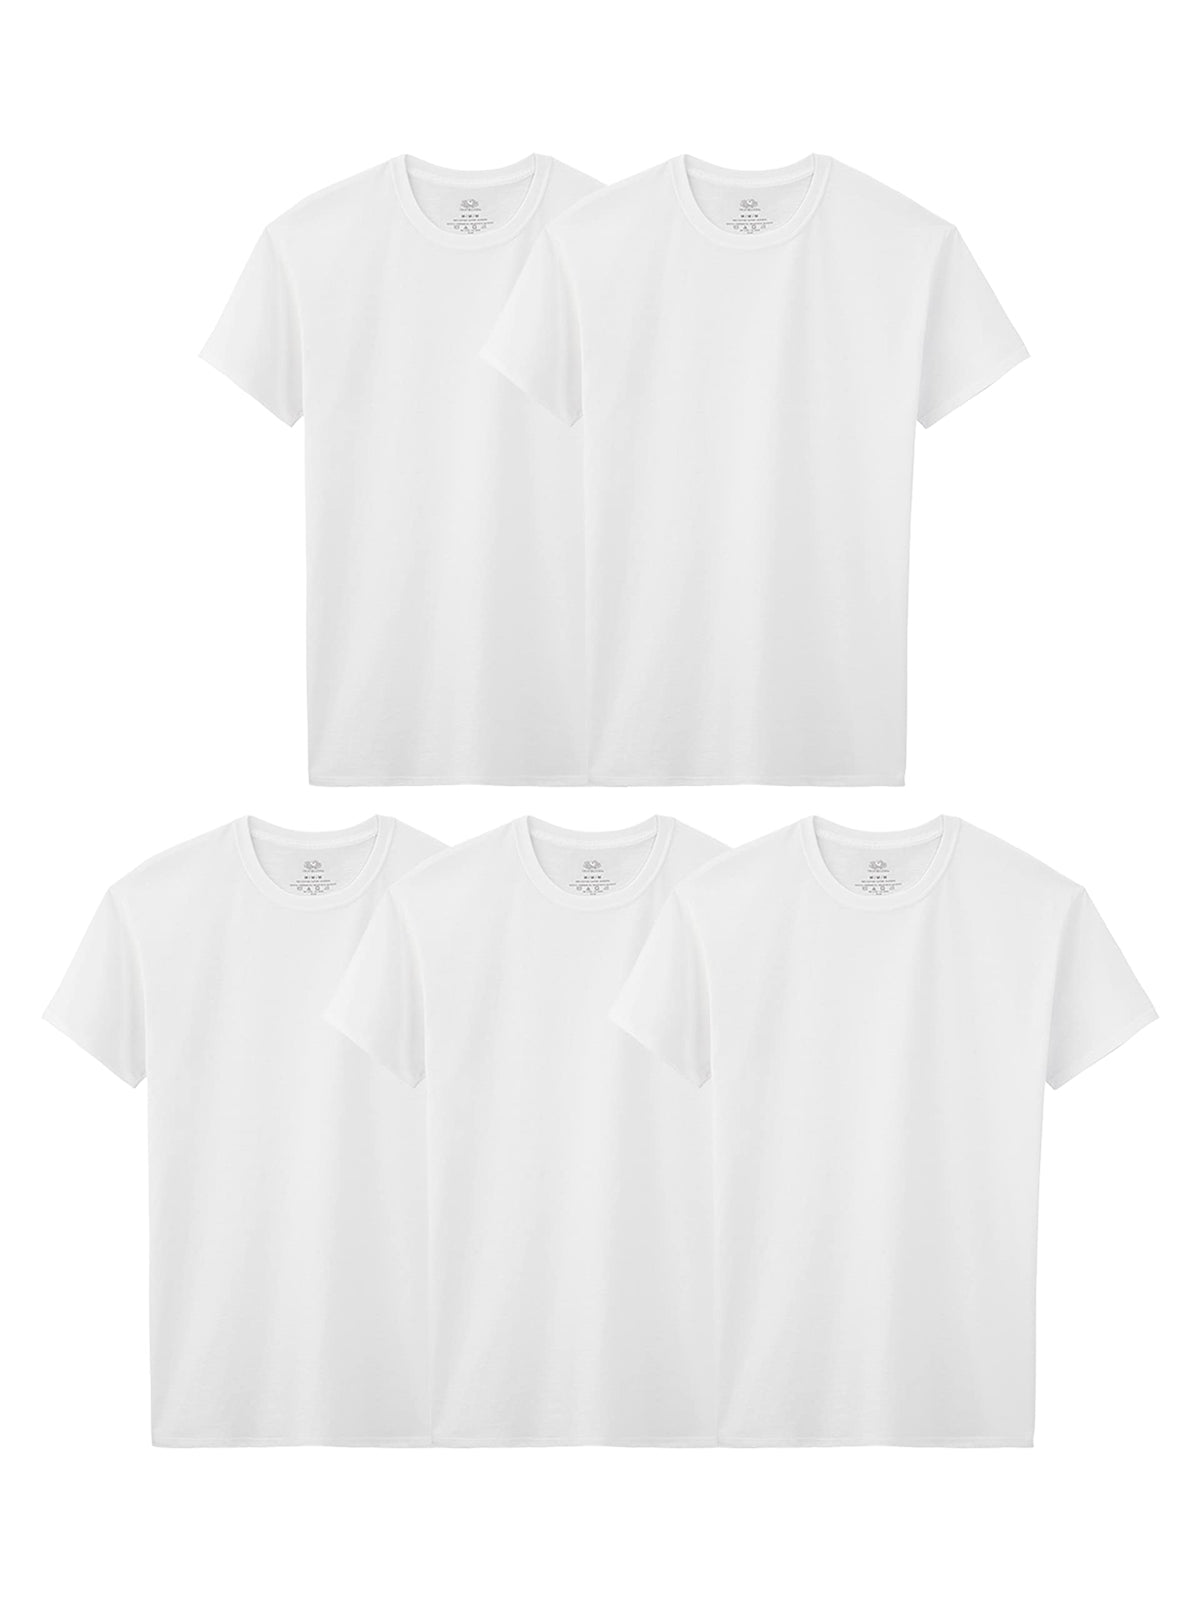 Fruit of the Loom Boys' Big Cotton White T Shirt, Small